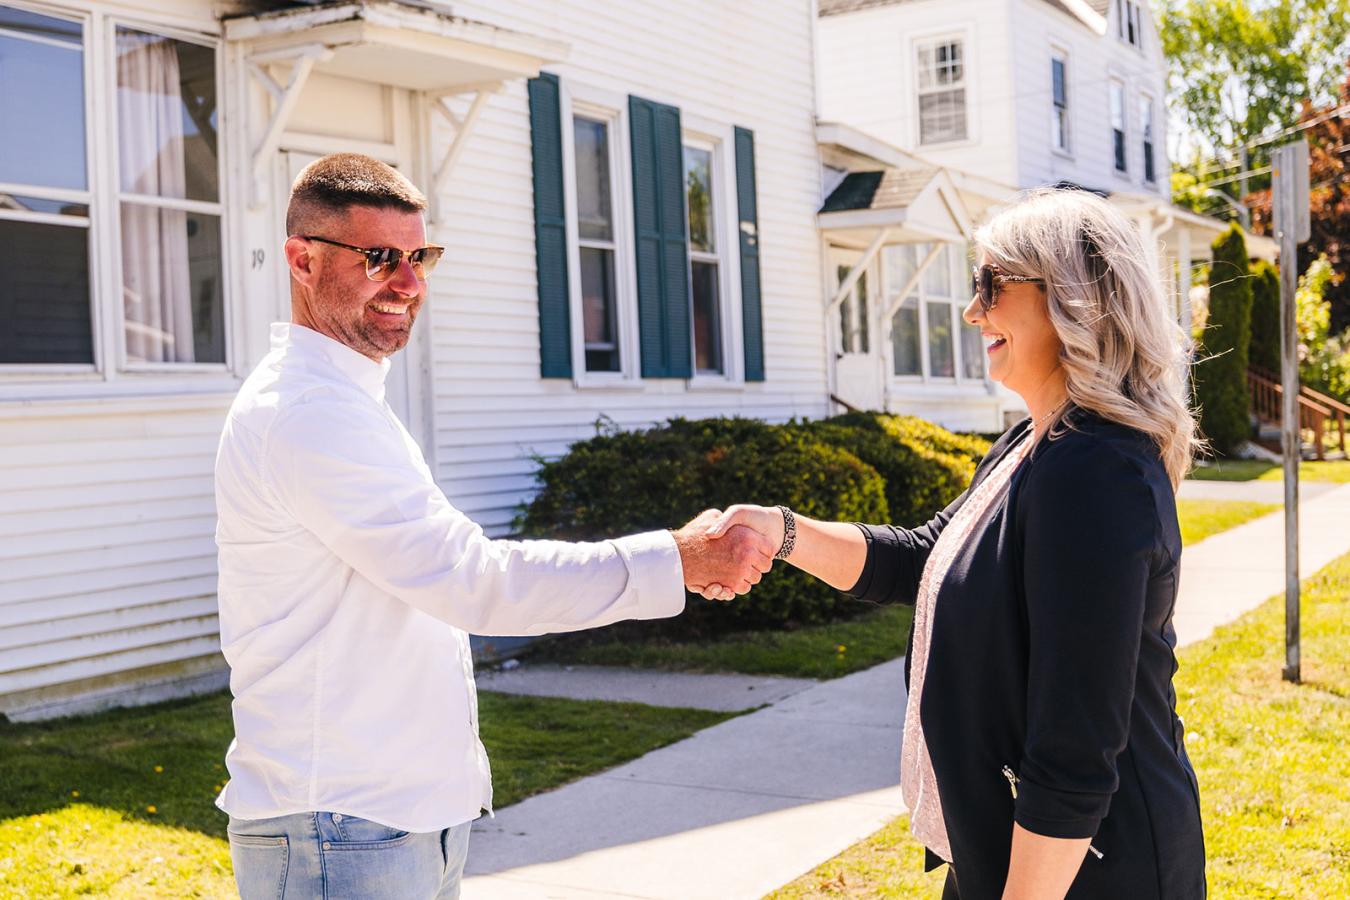 local Plattsburgh man shaking hands with his realtor after getting a mortgage through the Plattsburgh credit union branch